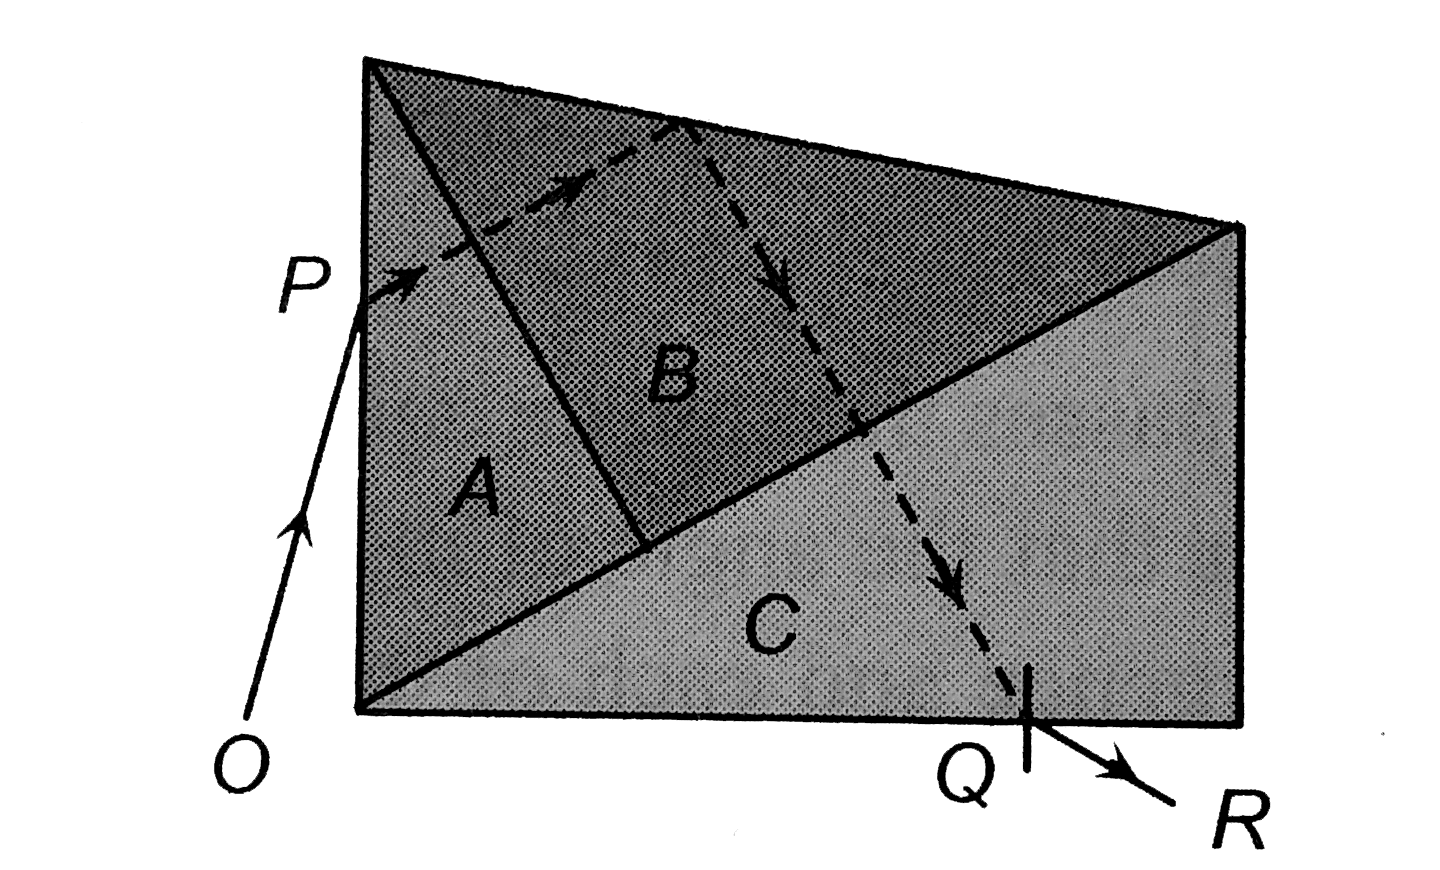 Three glass prism A,B and C of same refractive index are placed in contact with each other as shown in figure, with no air gap between the prisms. Monochromatic ray of light OP passes through the prism assembly and emerges as QR. The conditions of minimum deviation is satisfied in the prisms.